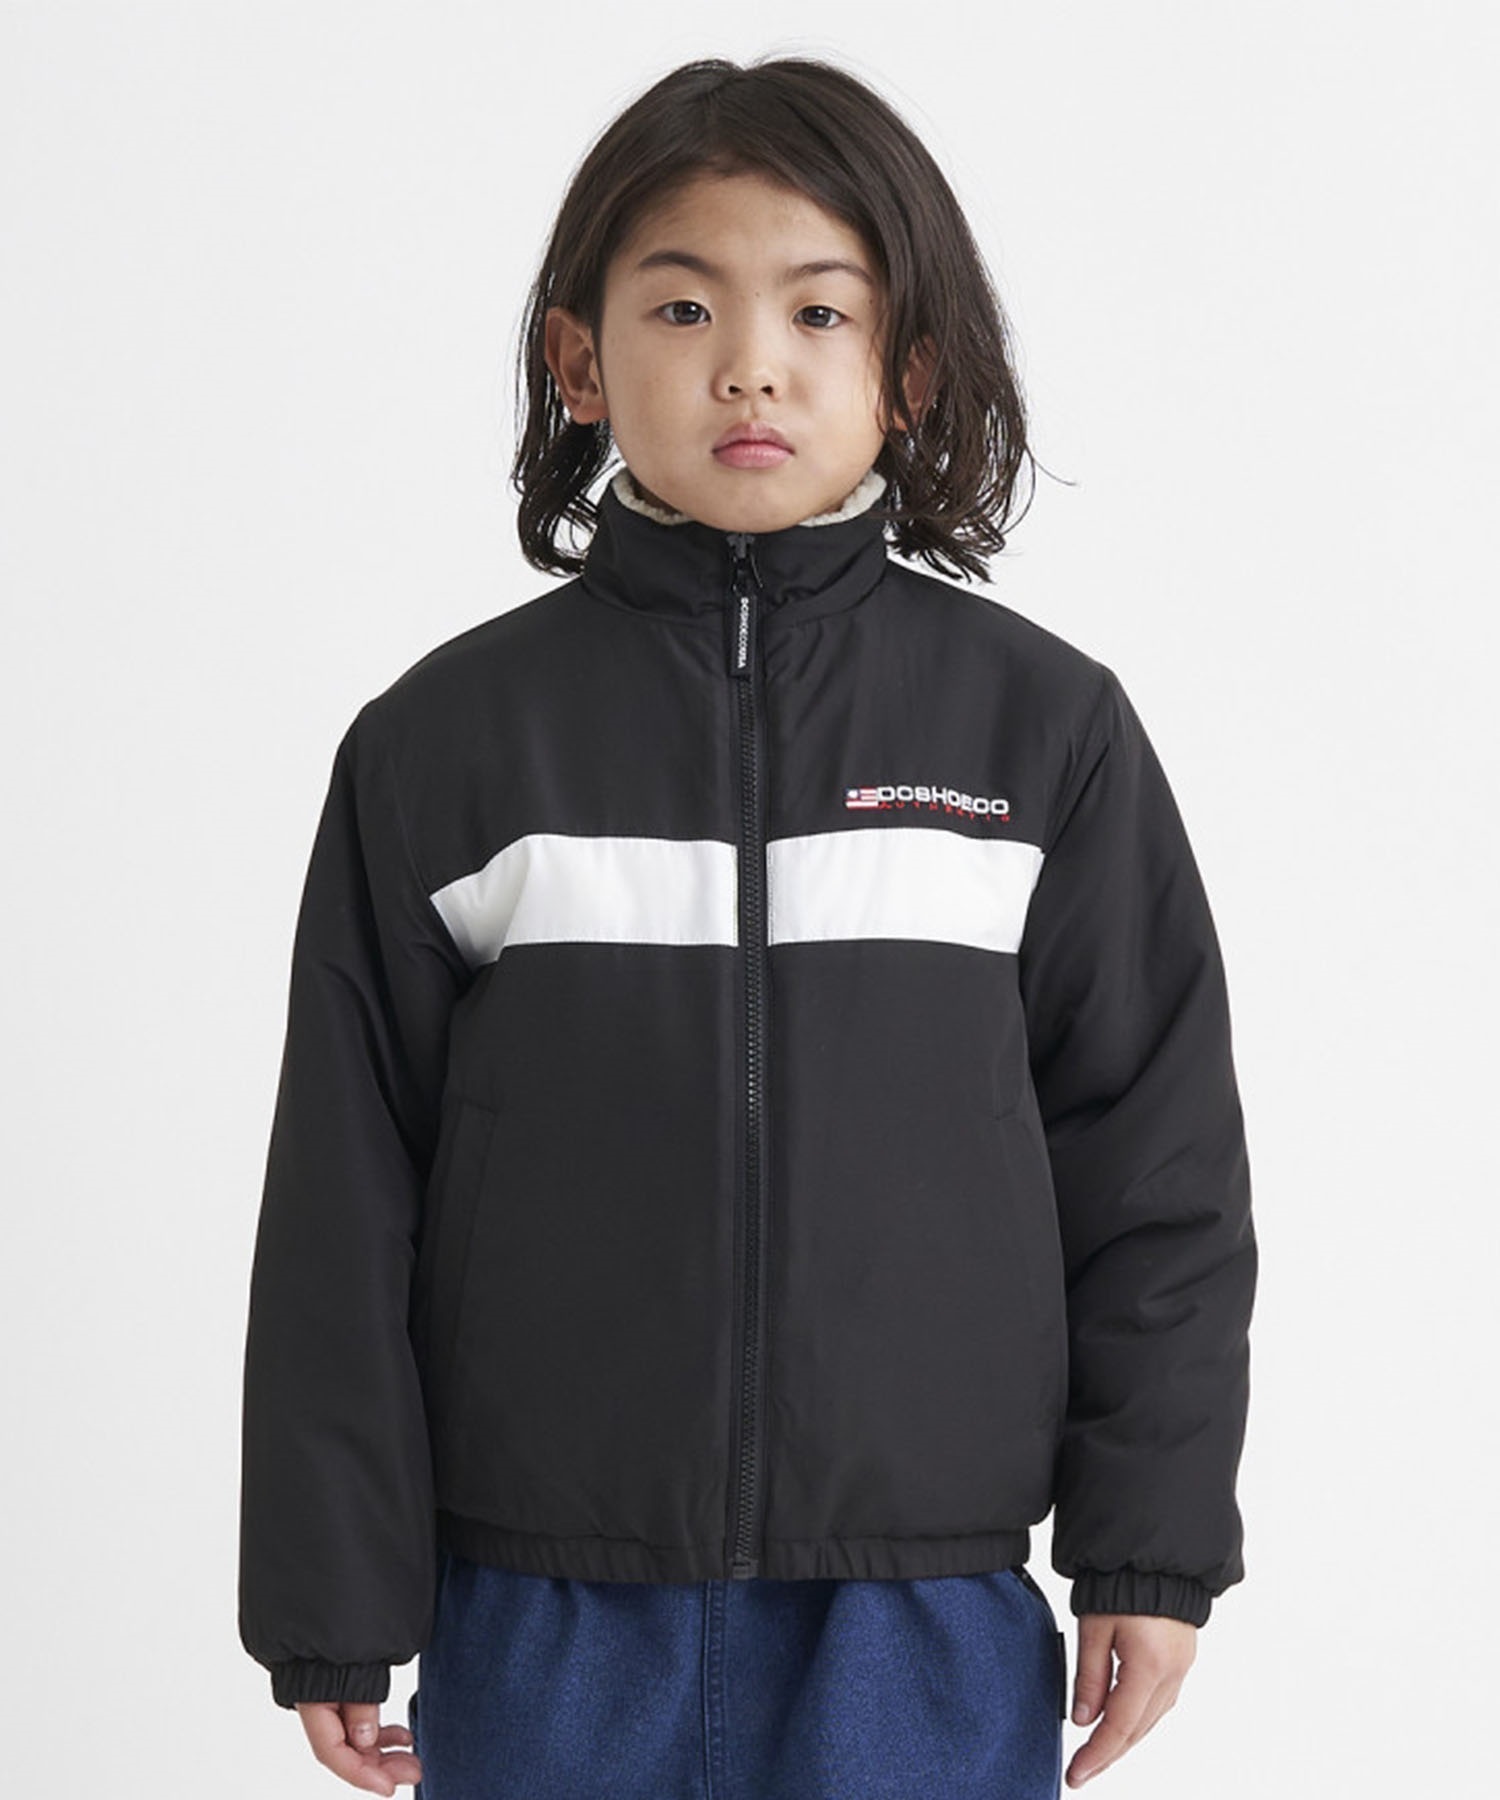 DC/ディーシー 23 KD REVERSIBLE STAND JACKET23 キッズ リバーシブル